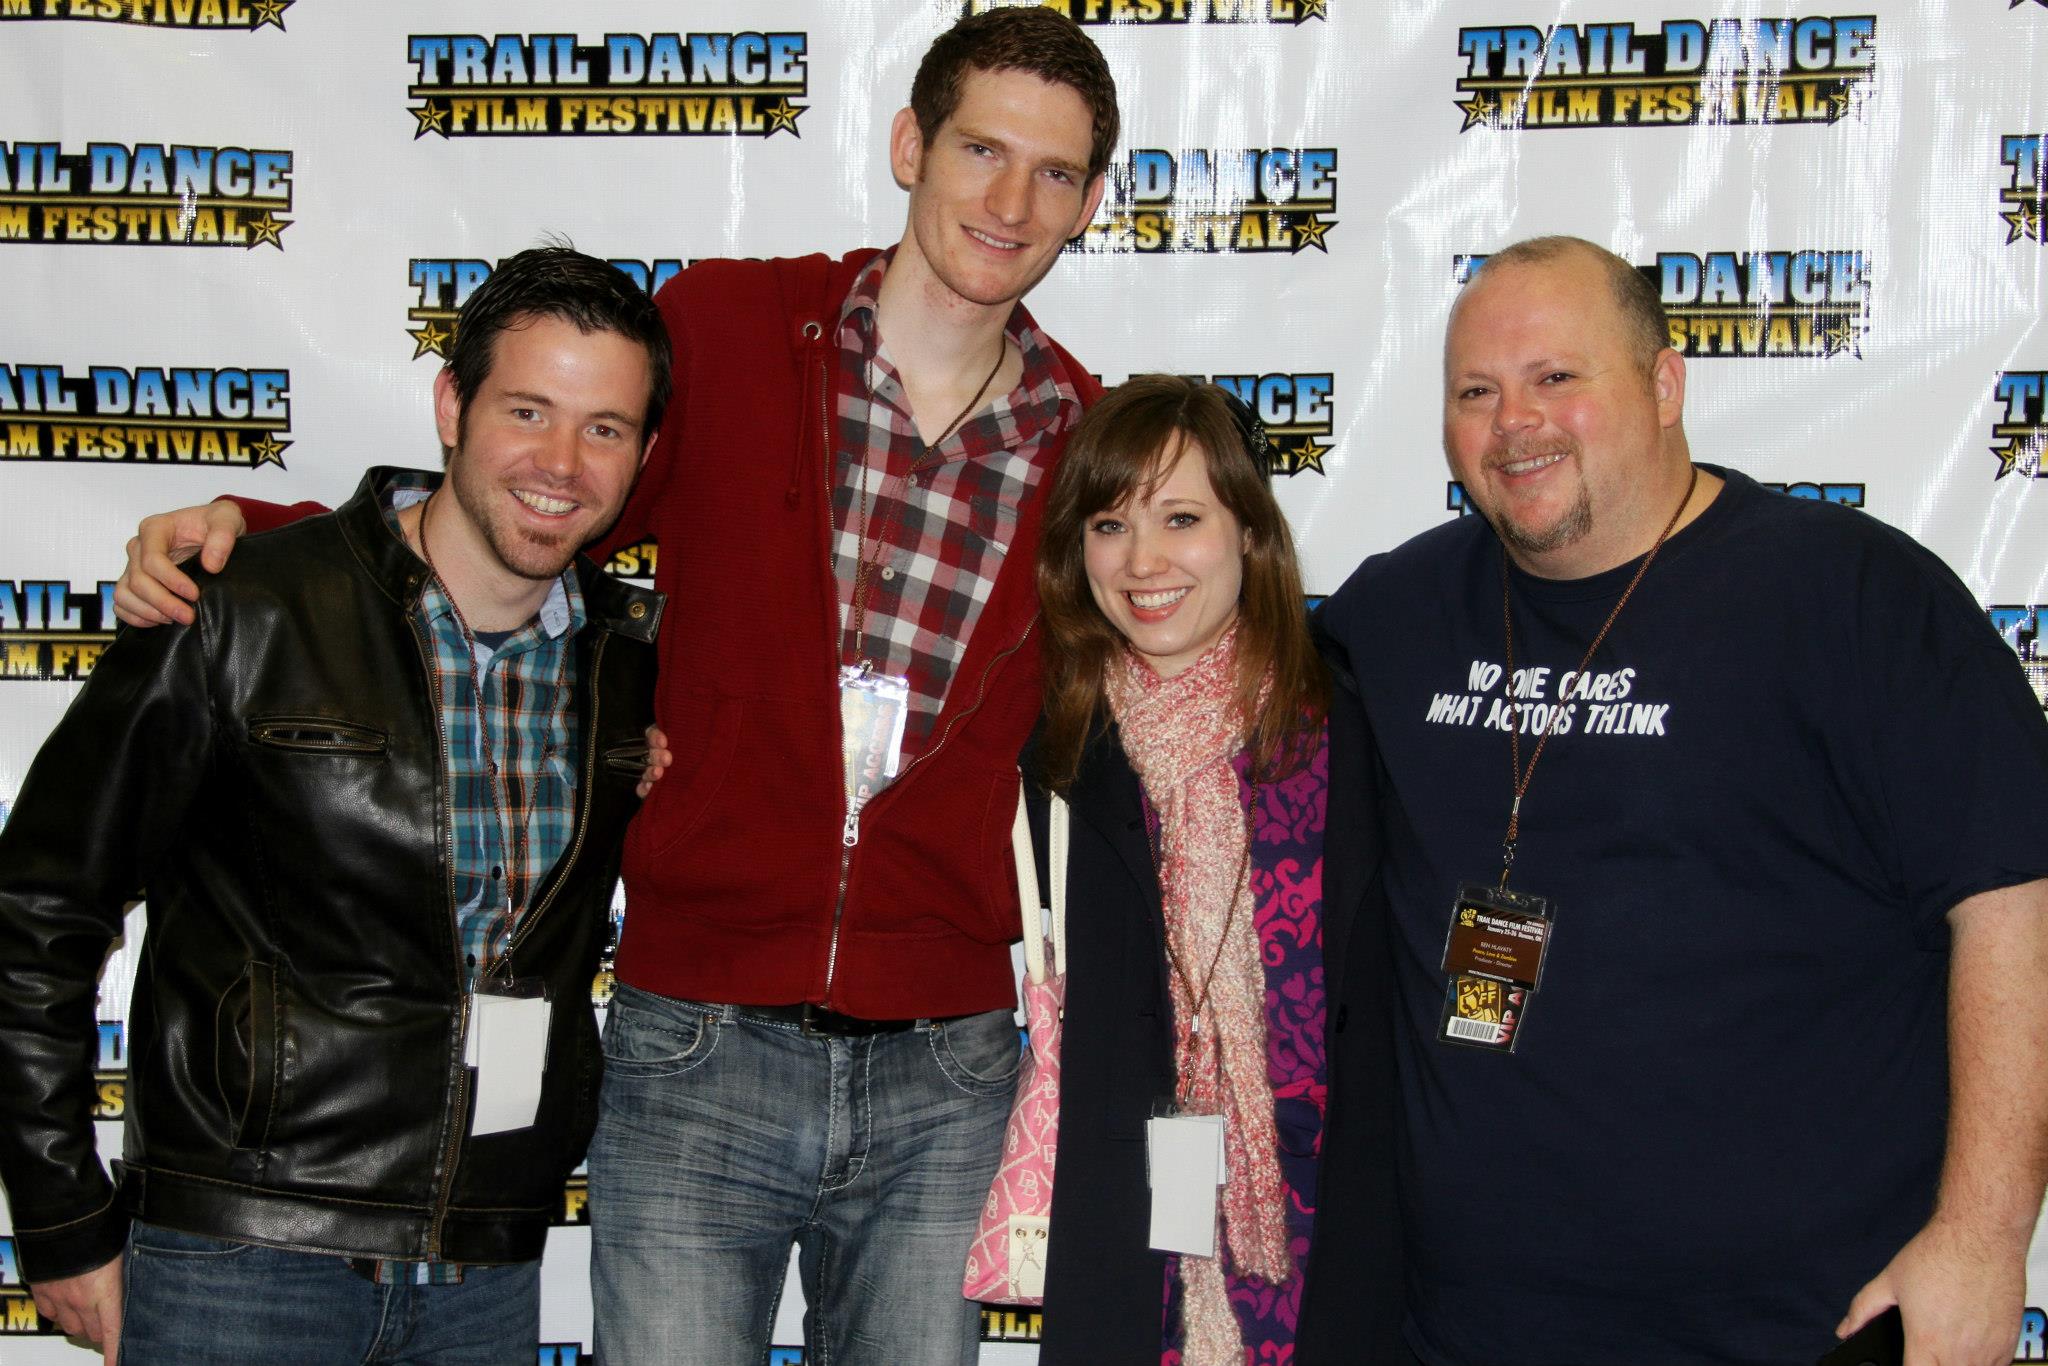 At the 2013 Trail Dance Film Festival